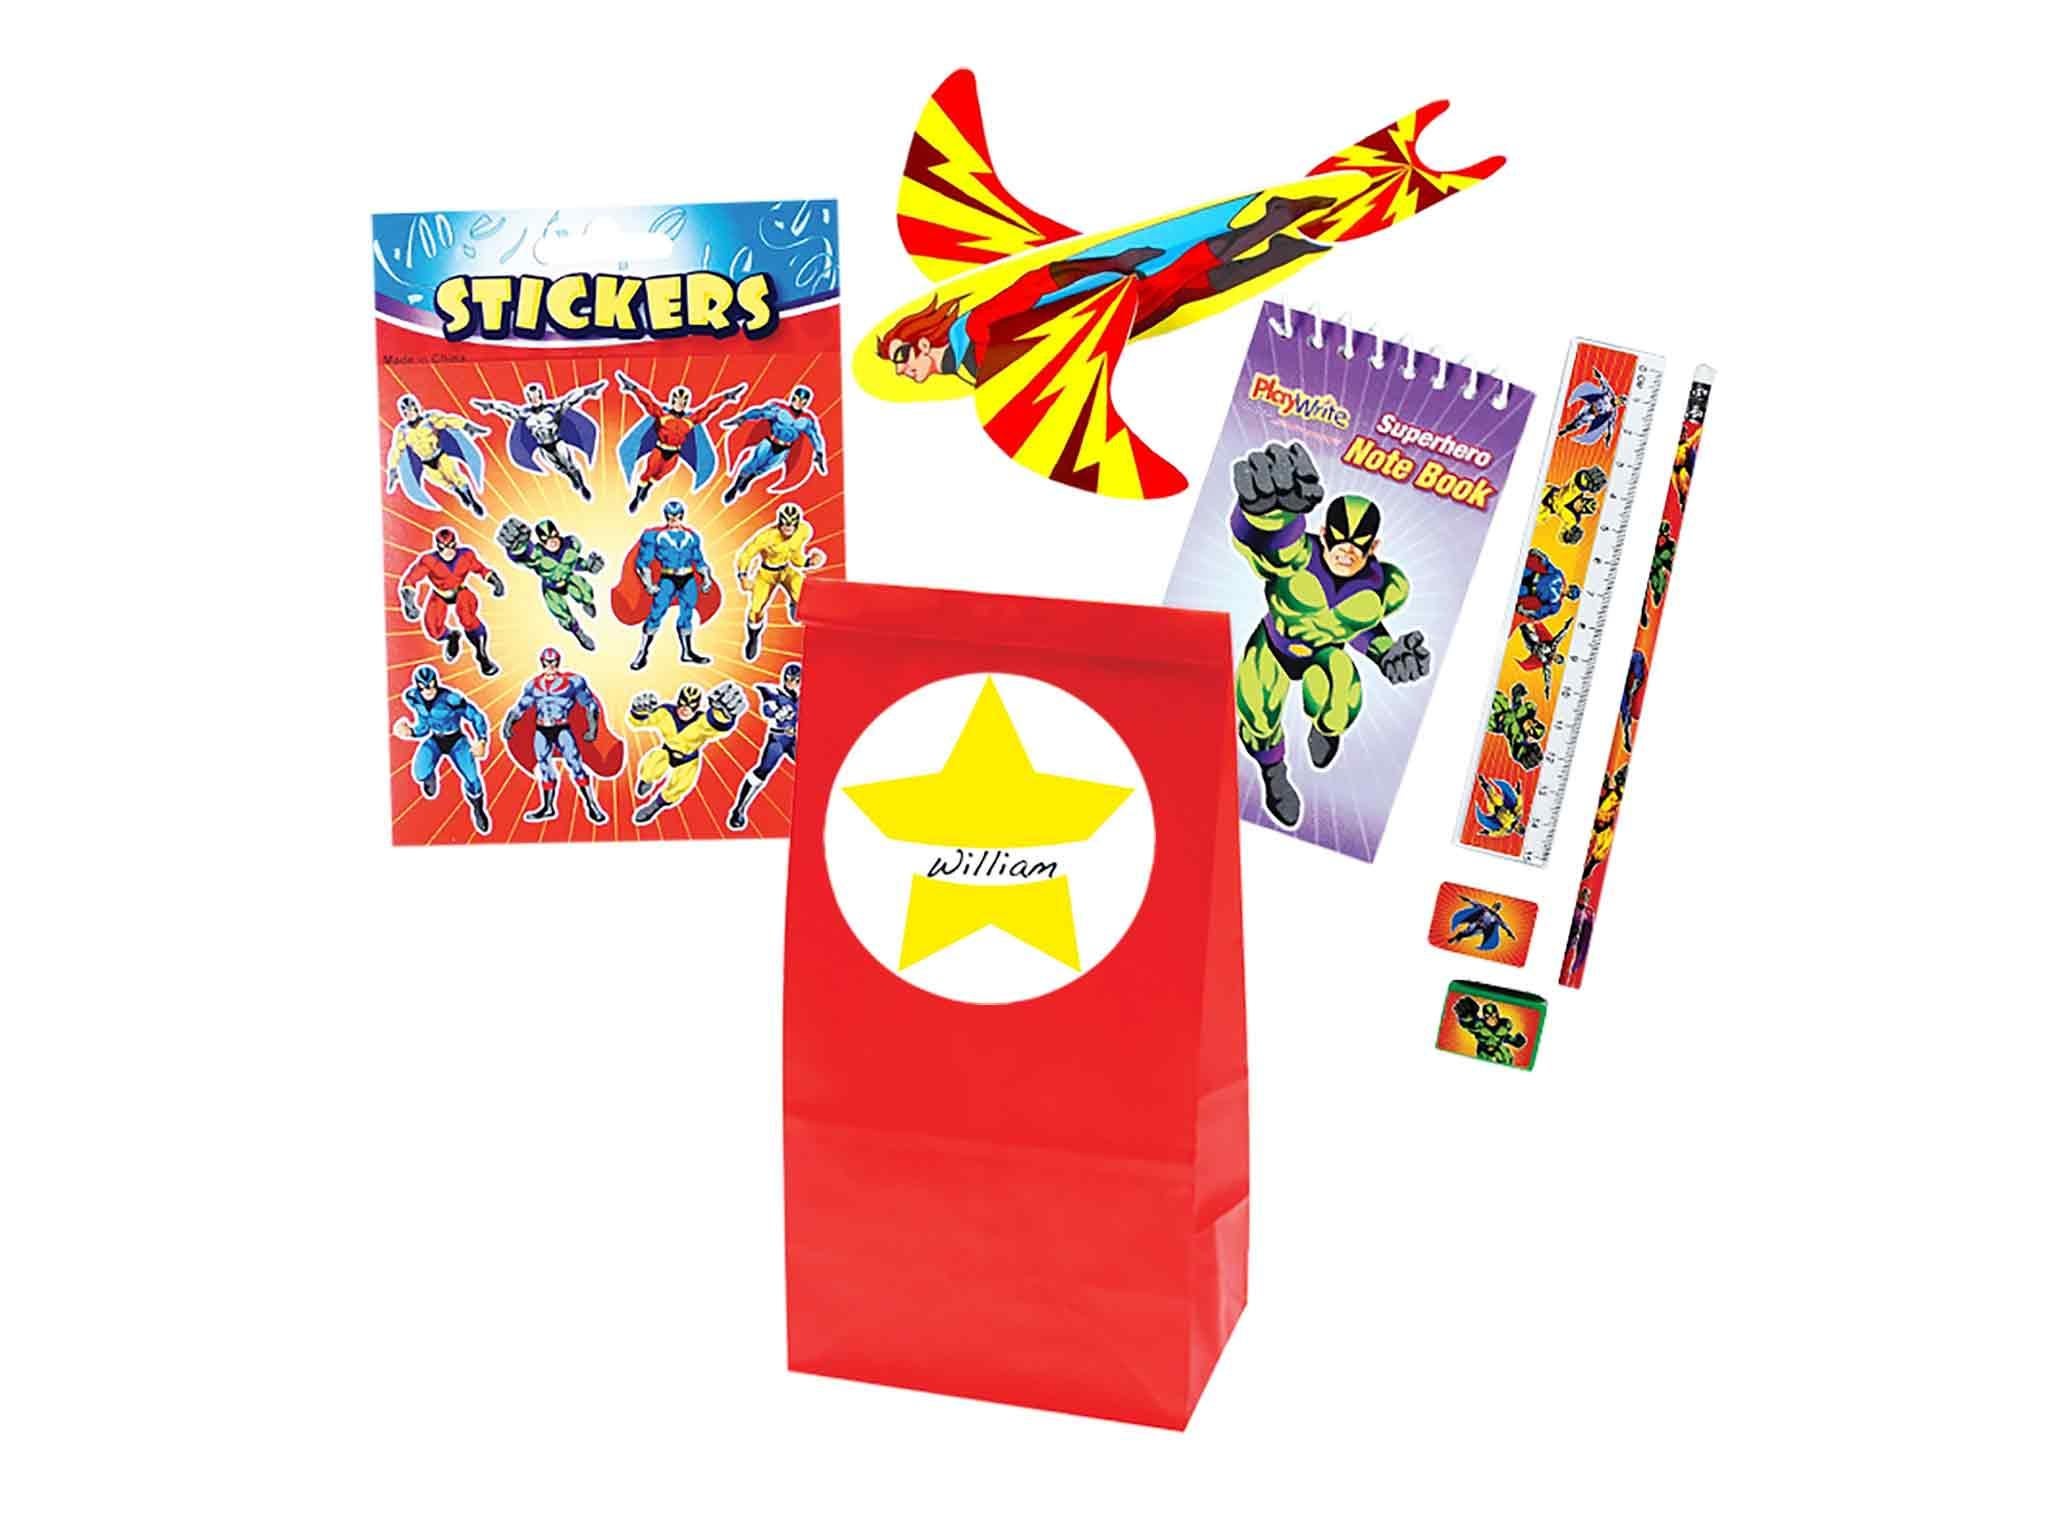 Dracco STREET BEANZ 15 Packs For £6 ideal For Party Bags 50 Designs To Collect. 